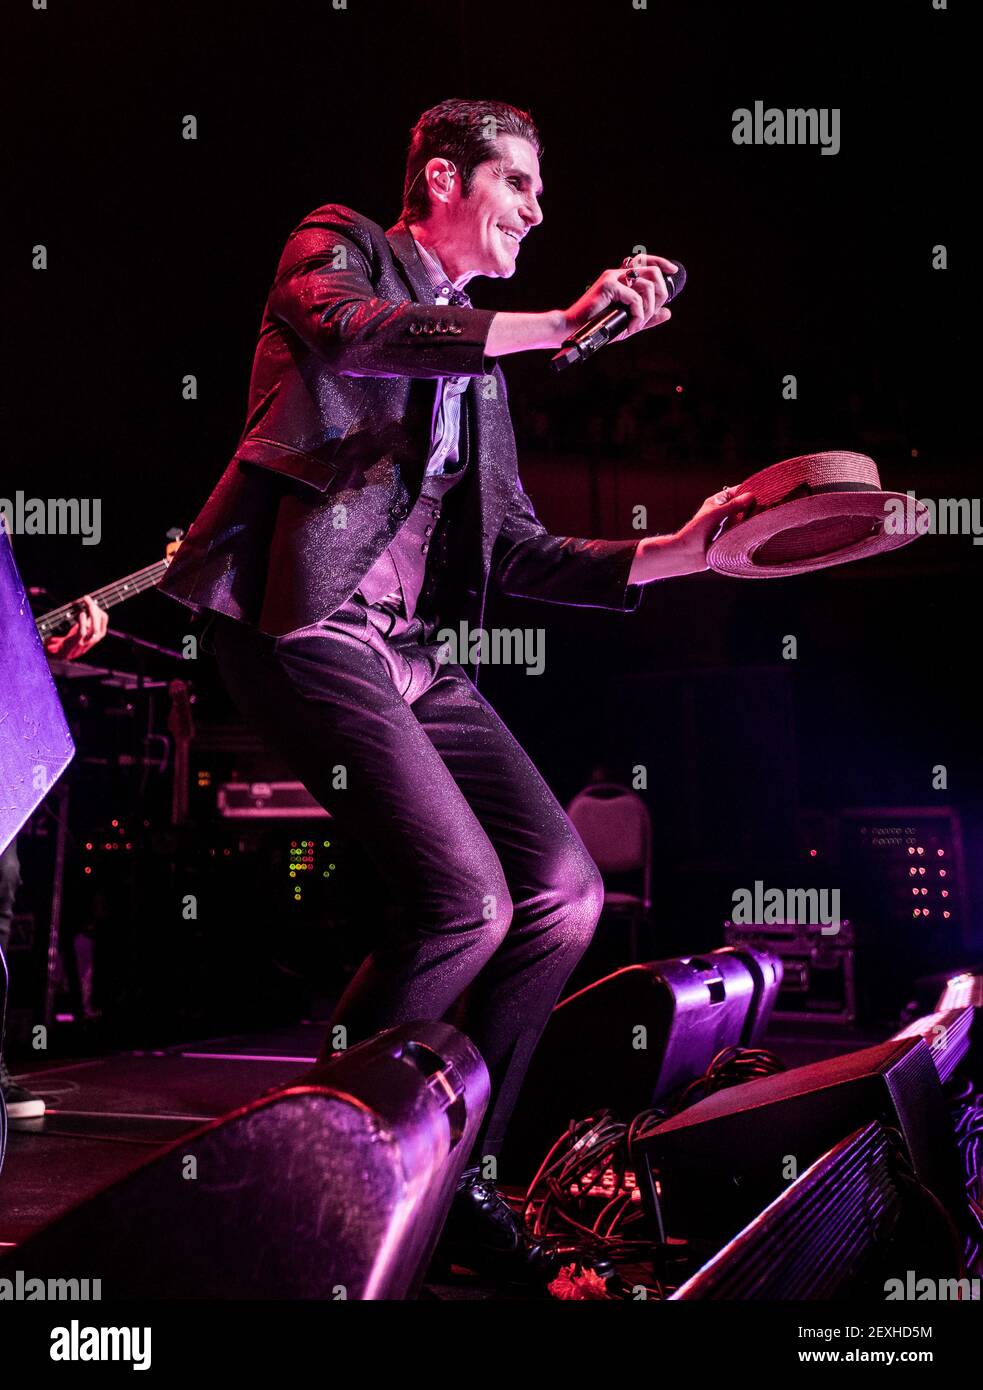 Musician Perry Farrell of Janes Addiction performs at the Masonic Auditorium on September 21, 2016 in San Francisco, California. (Photo by Chris Tuite/ImageSPACE) *** Please Use Credit from Credit Field *** Stock Photo